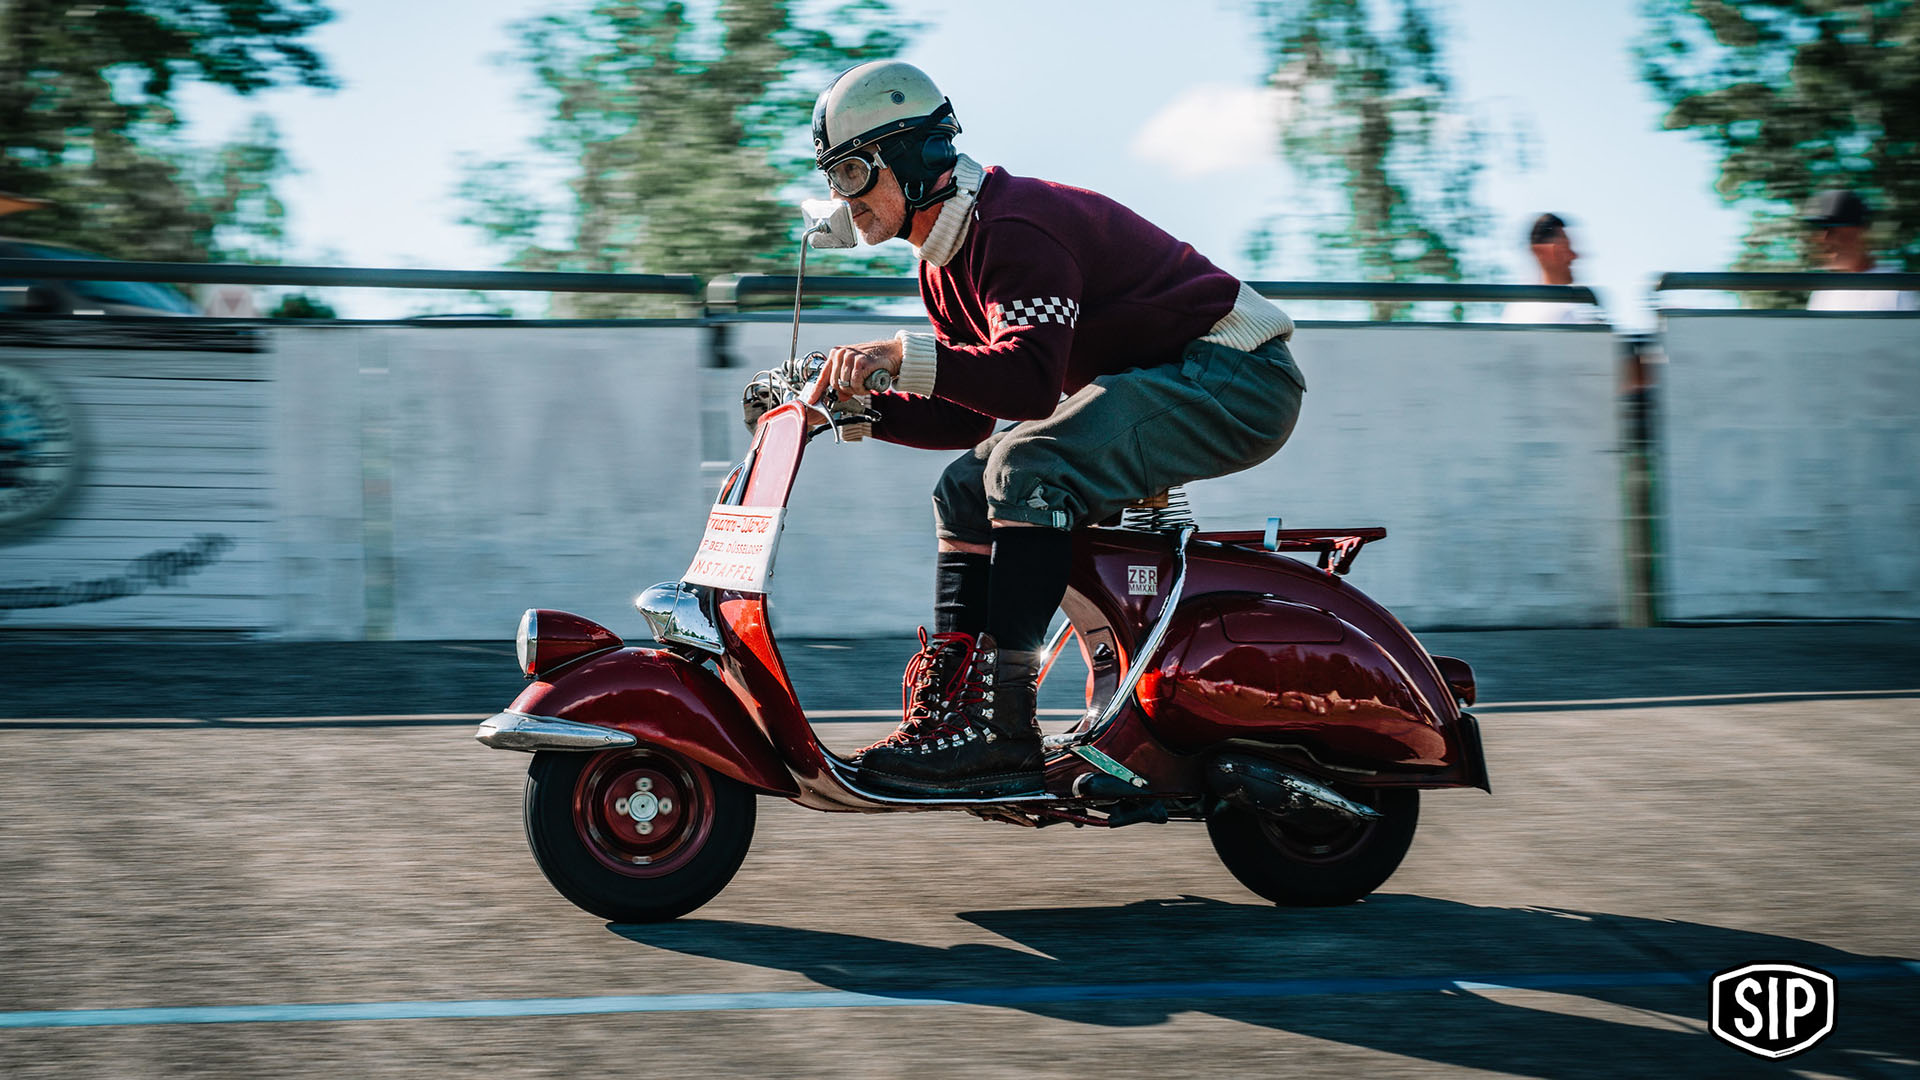 New Vespa event in Bavaria: 1st cement track race with Vespa oldies